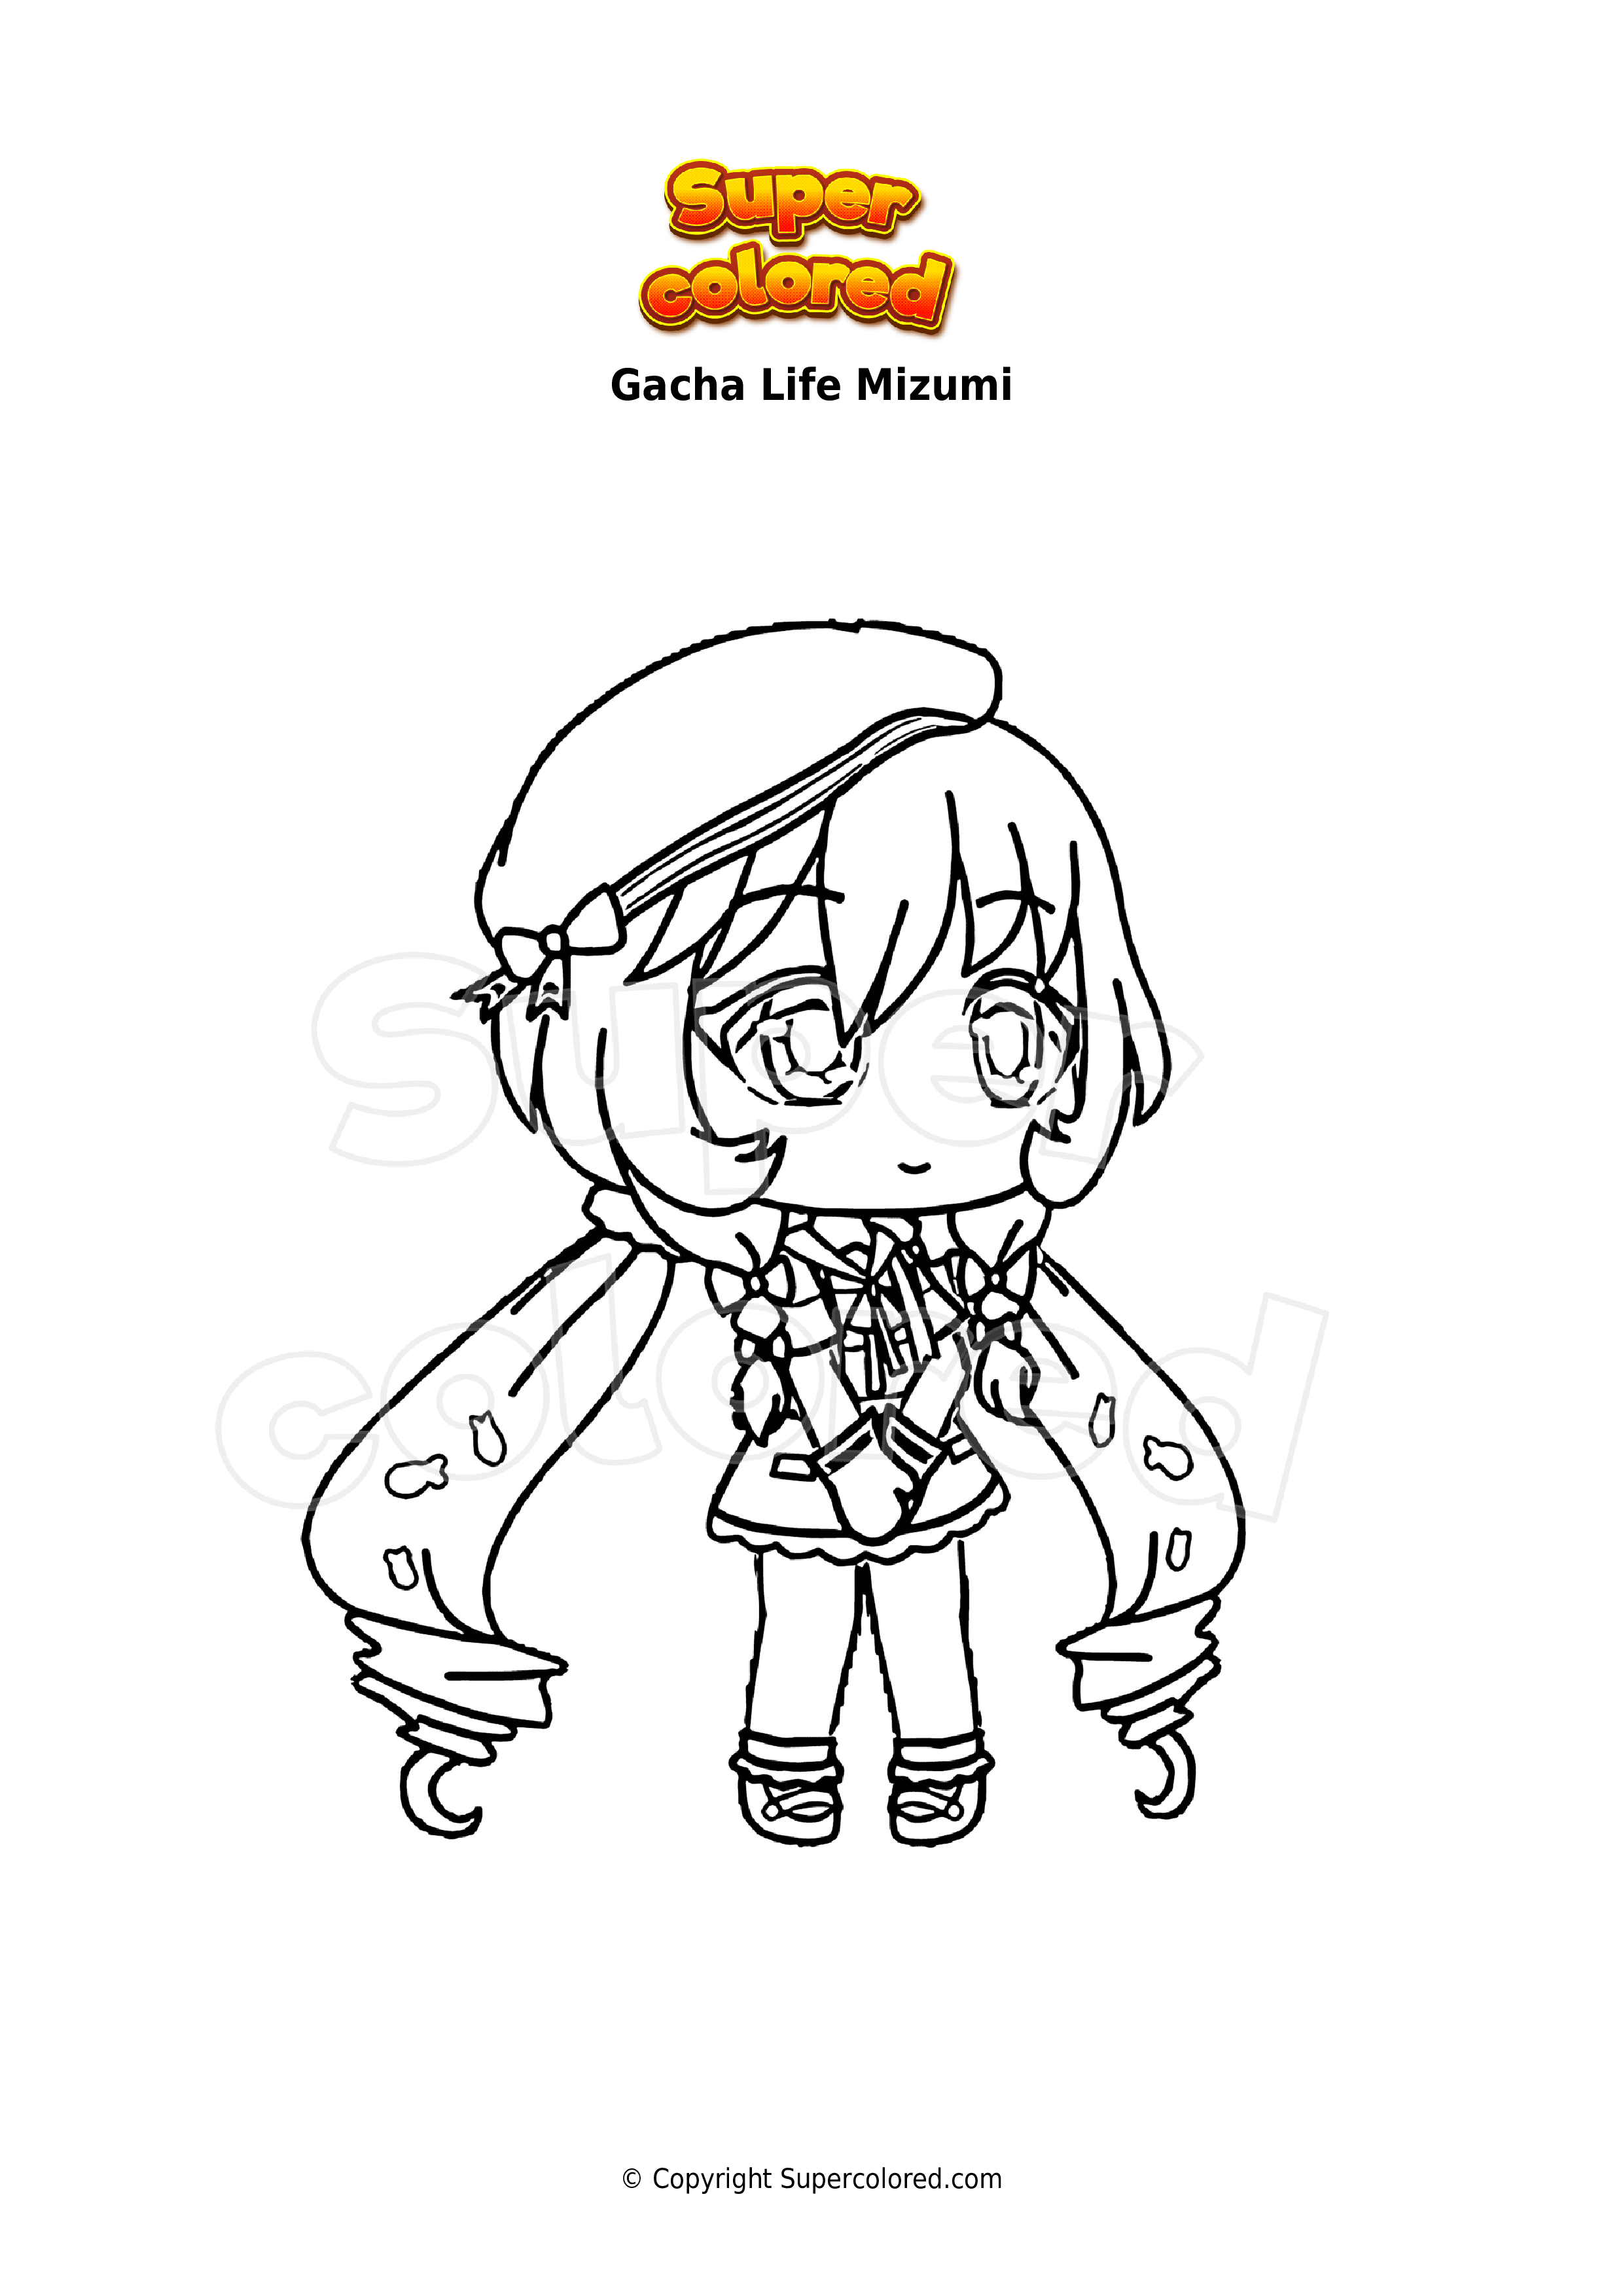 Coloring Pages - Gacha Life - Supercolored